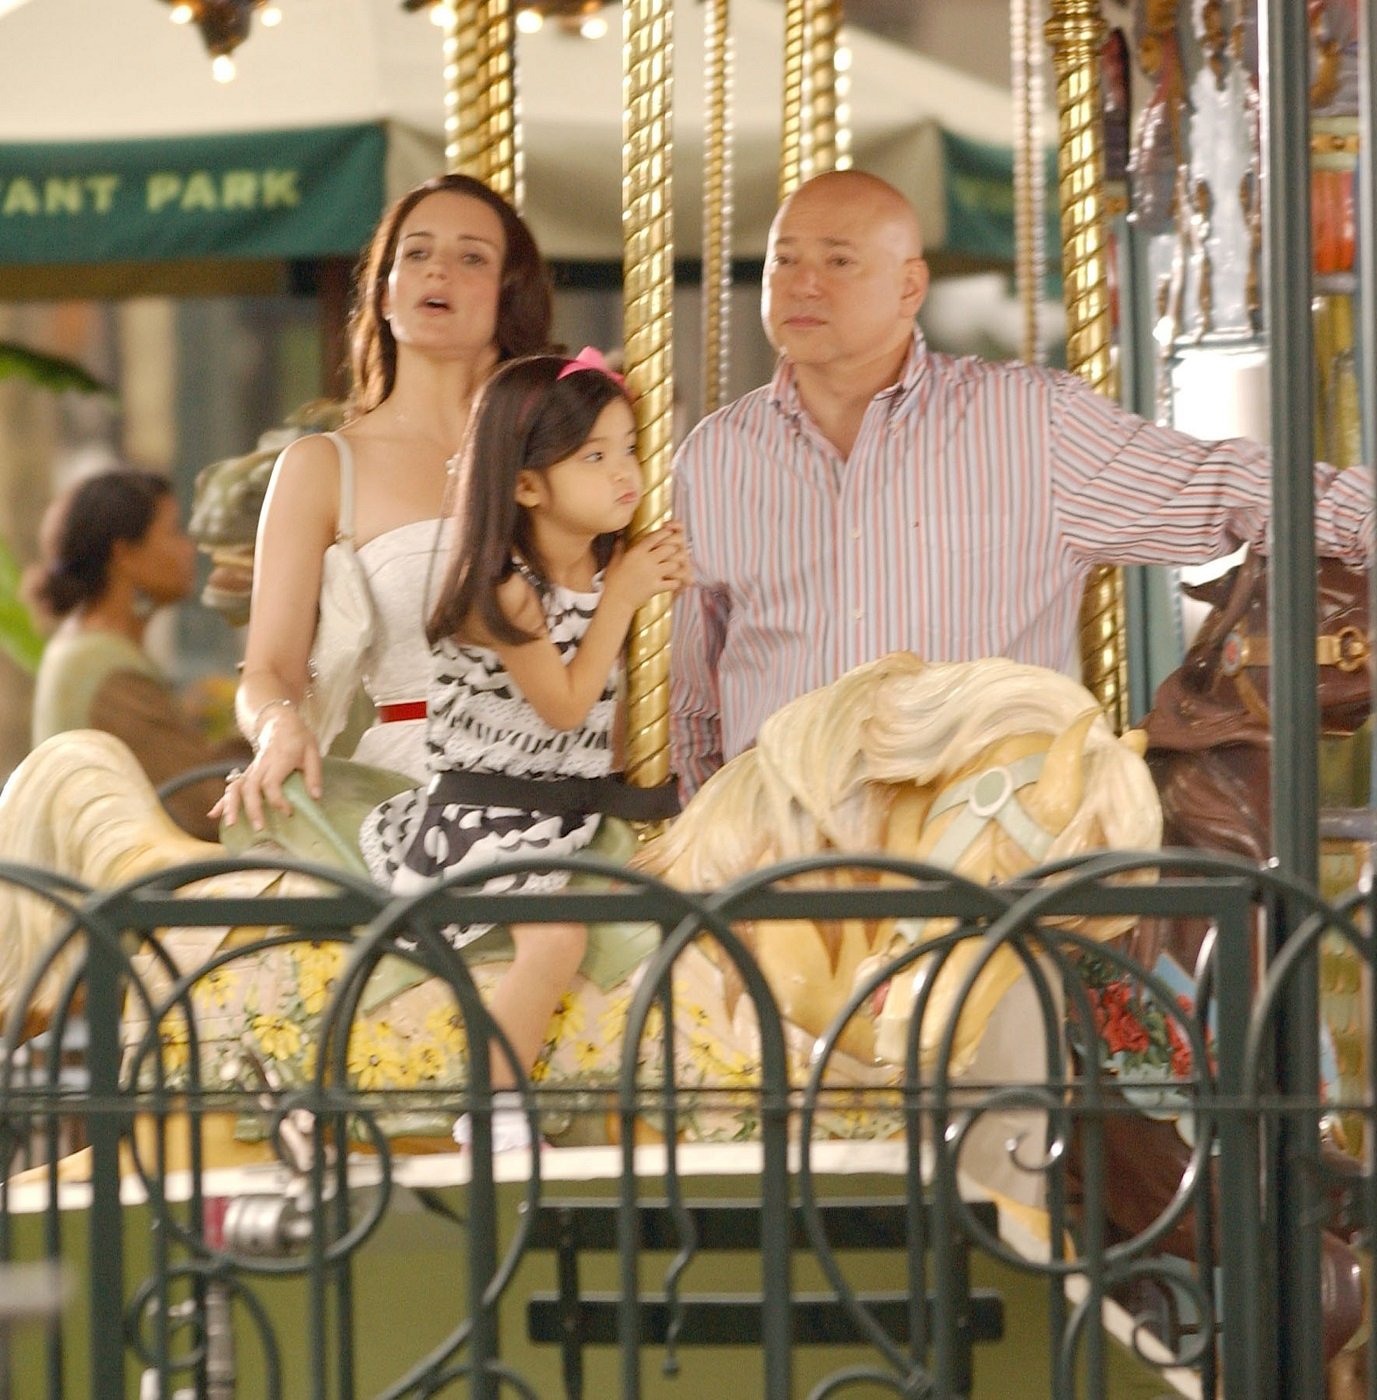 Kristin Davis and Evan Handler stand on the Carousel in Bryant Park with their on-screen daughter